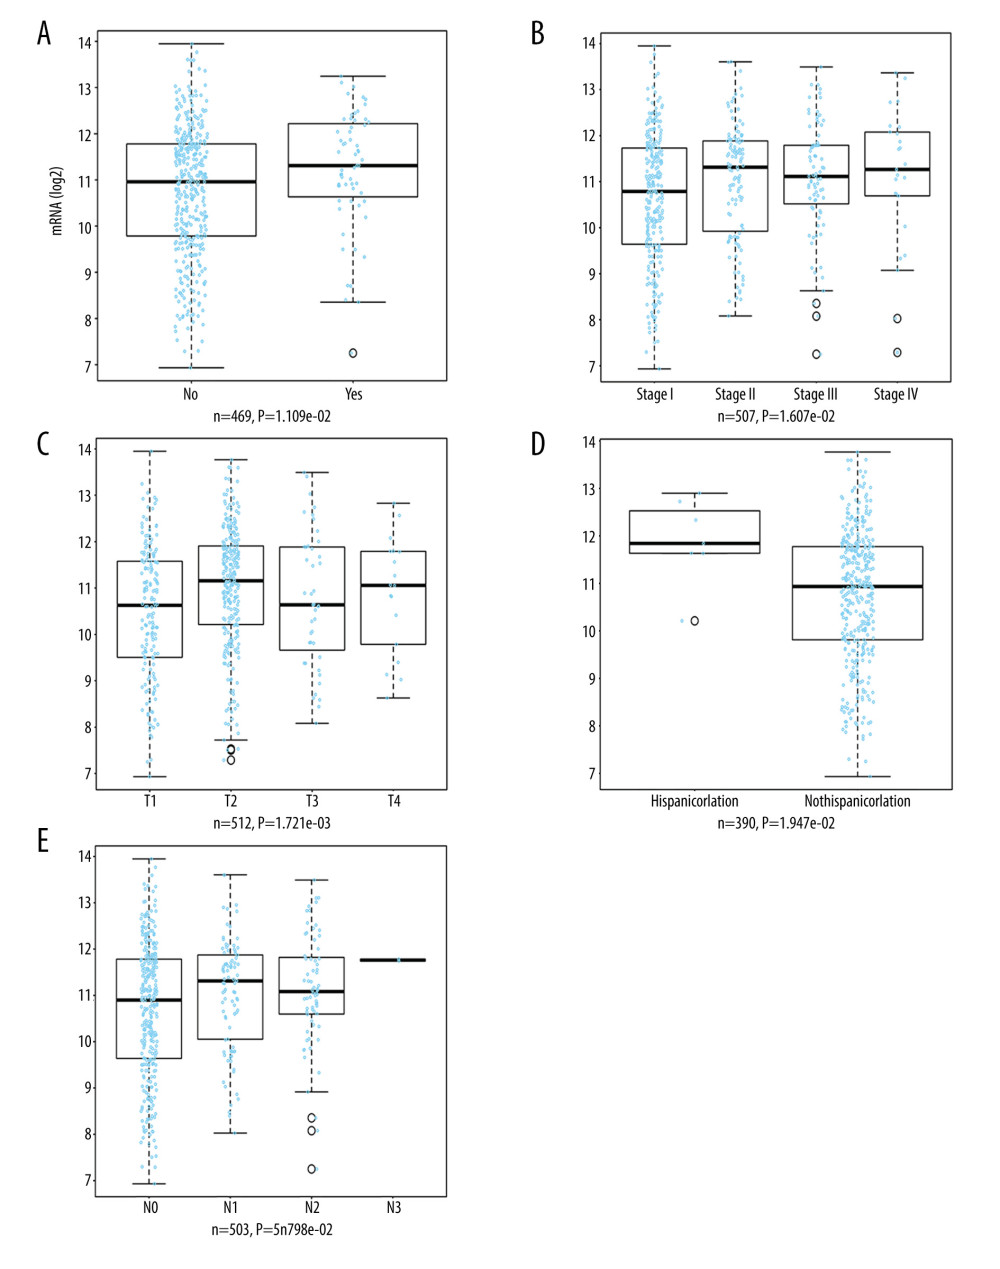 LinkedOmics analysis for the relationship between TOP2A mRNA expression level and clinicopathological features of LUAD. (A) Radiation therapy; (B) pathologic stage; (C) pathology t stage; (D) ethnicity; (E) pathology n stage. Box plots and P values of were produced using LinkedOmics.